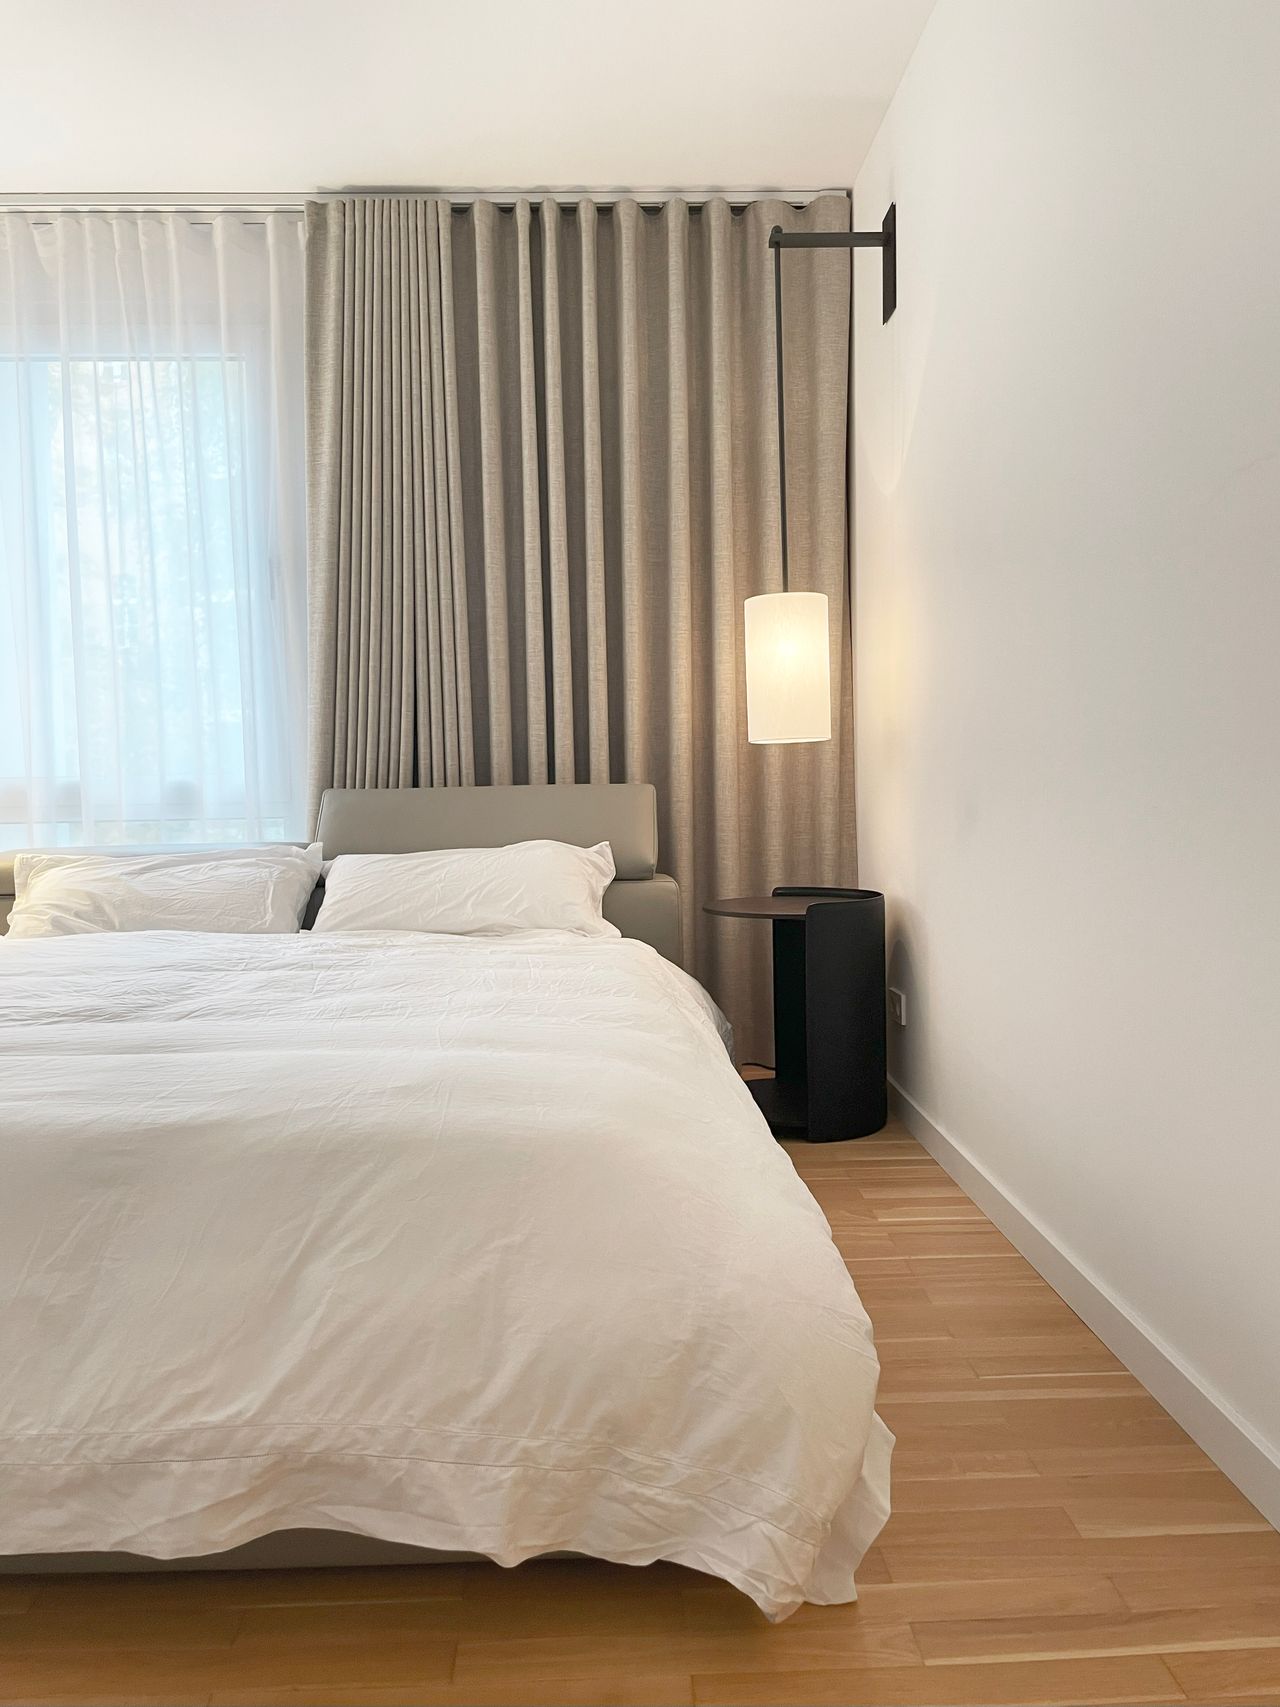 *Summer special, limited time offer* Luxury 3 bedroom apartment in the city center (Mitte)